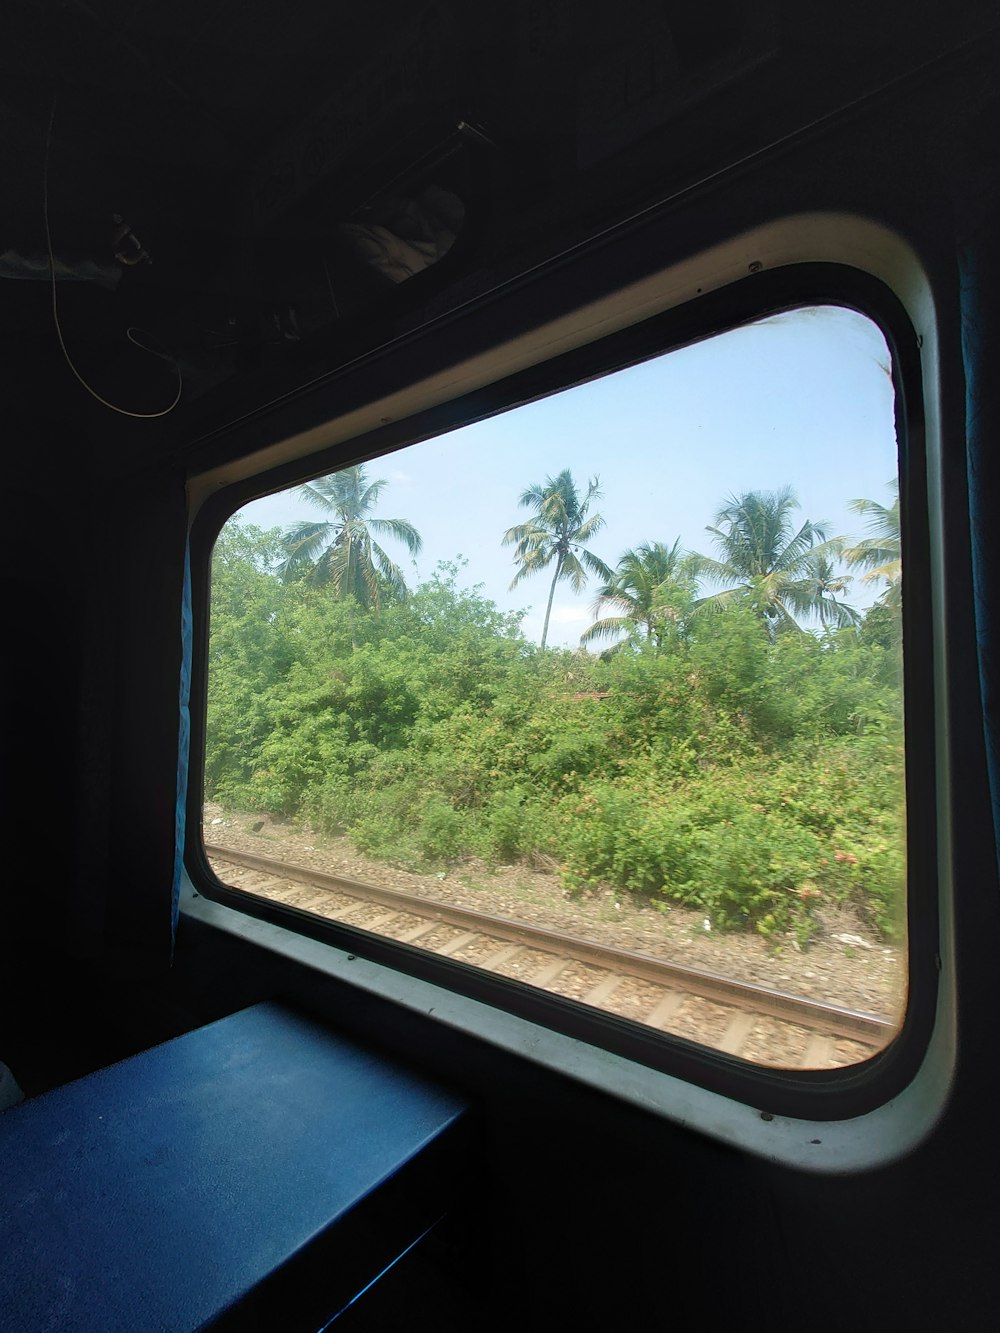 a view from inside a train looking out the window